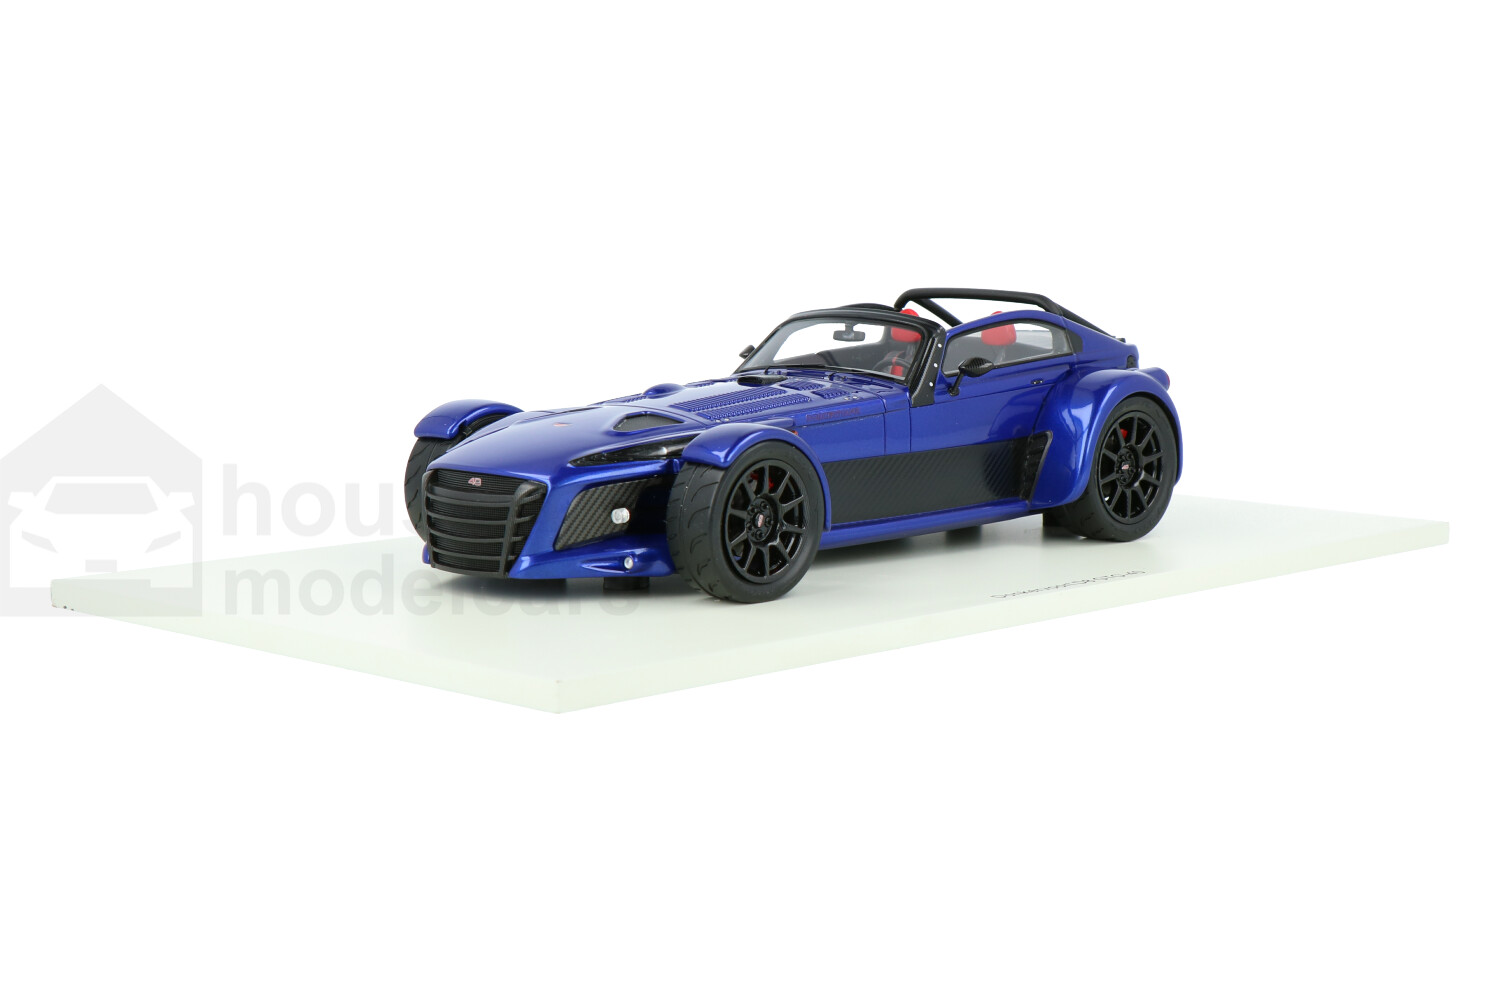 Donkervoort-D8-GTO-40-18S376_13159580006473769-SparkDonkervoort-D8-GTO-40-18S376_Houseofmodelcars_.jpg